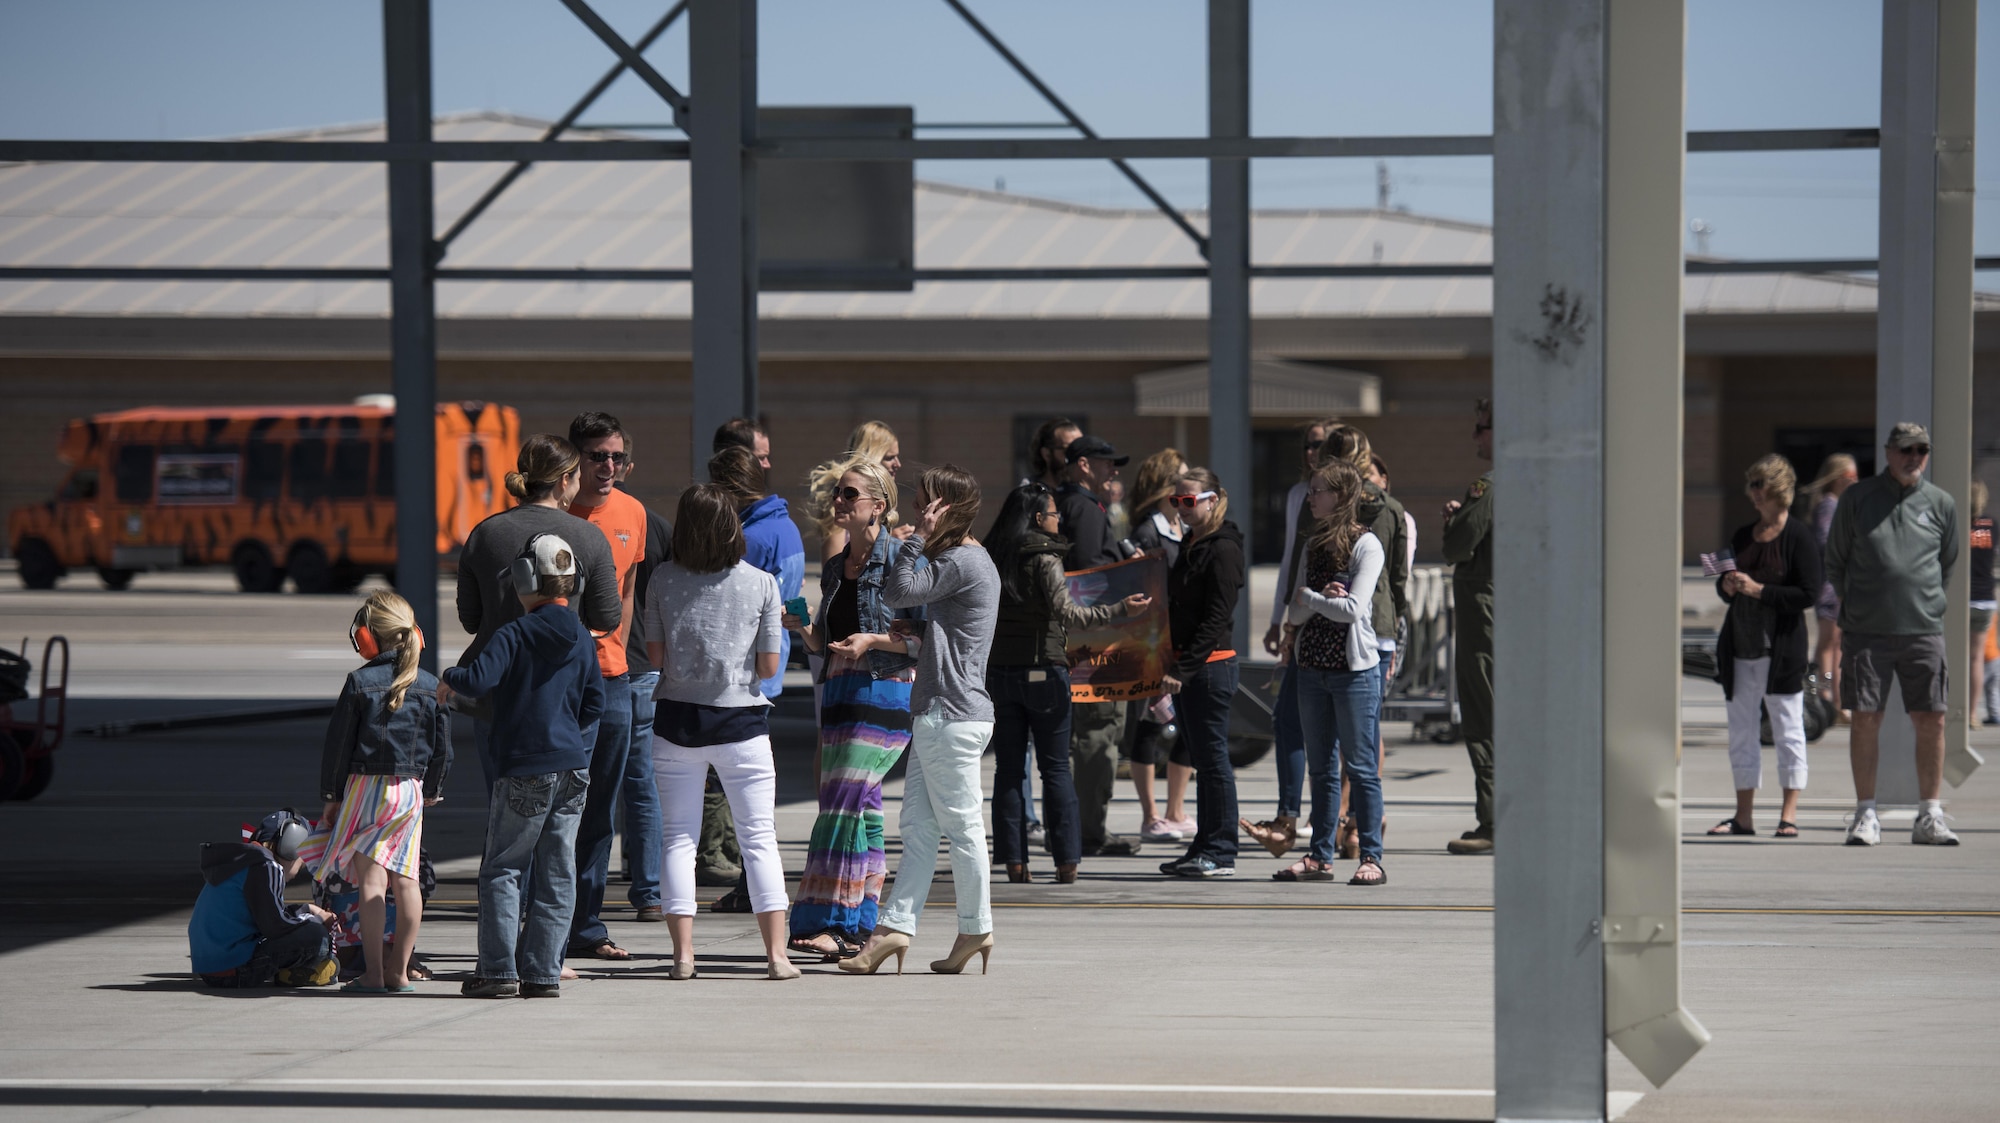 Family members gather, waiting for their loved ones returning from deployment, at Mountain Home Air Force Base, Idaho, April 17, 2016. Airmen from the 391st Fighter Squadron were deployed in support of Operation Inherent Resolve. (U.S. Air Force photo by Airman Alaysia Berry/Released)